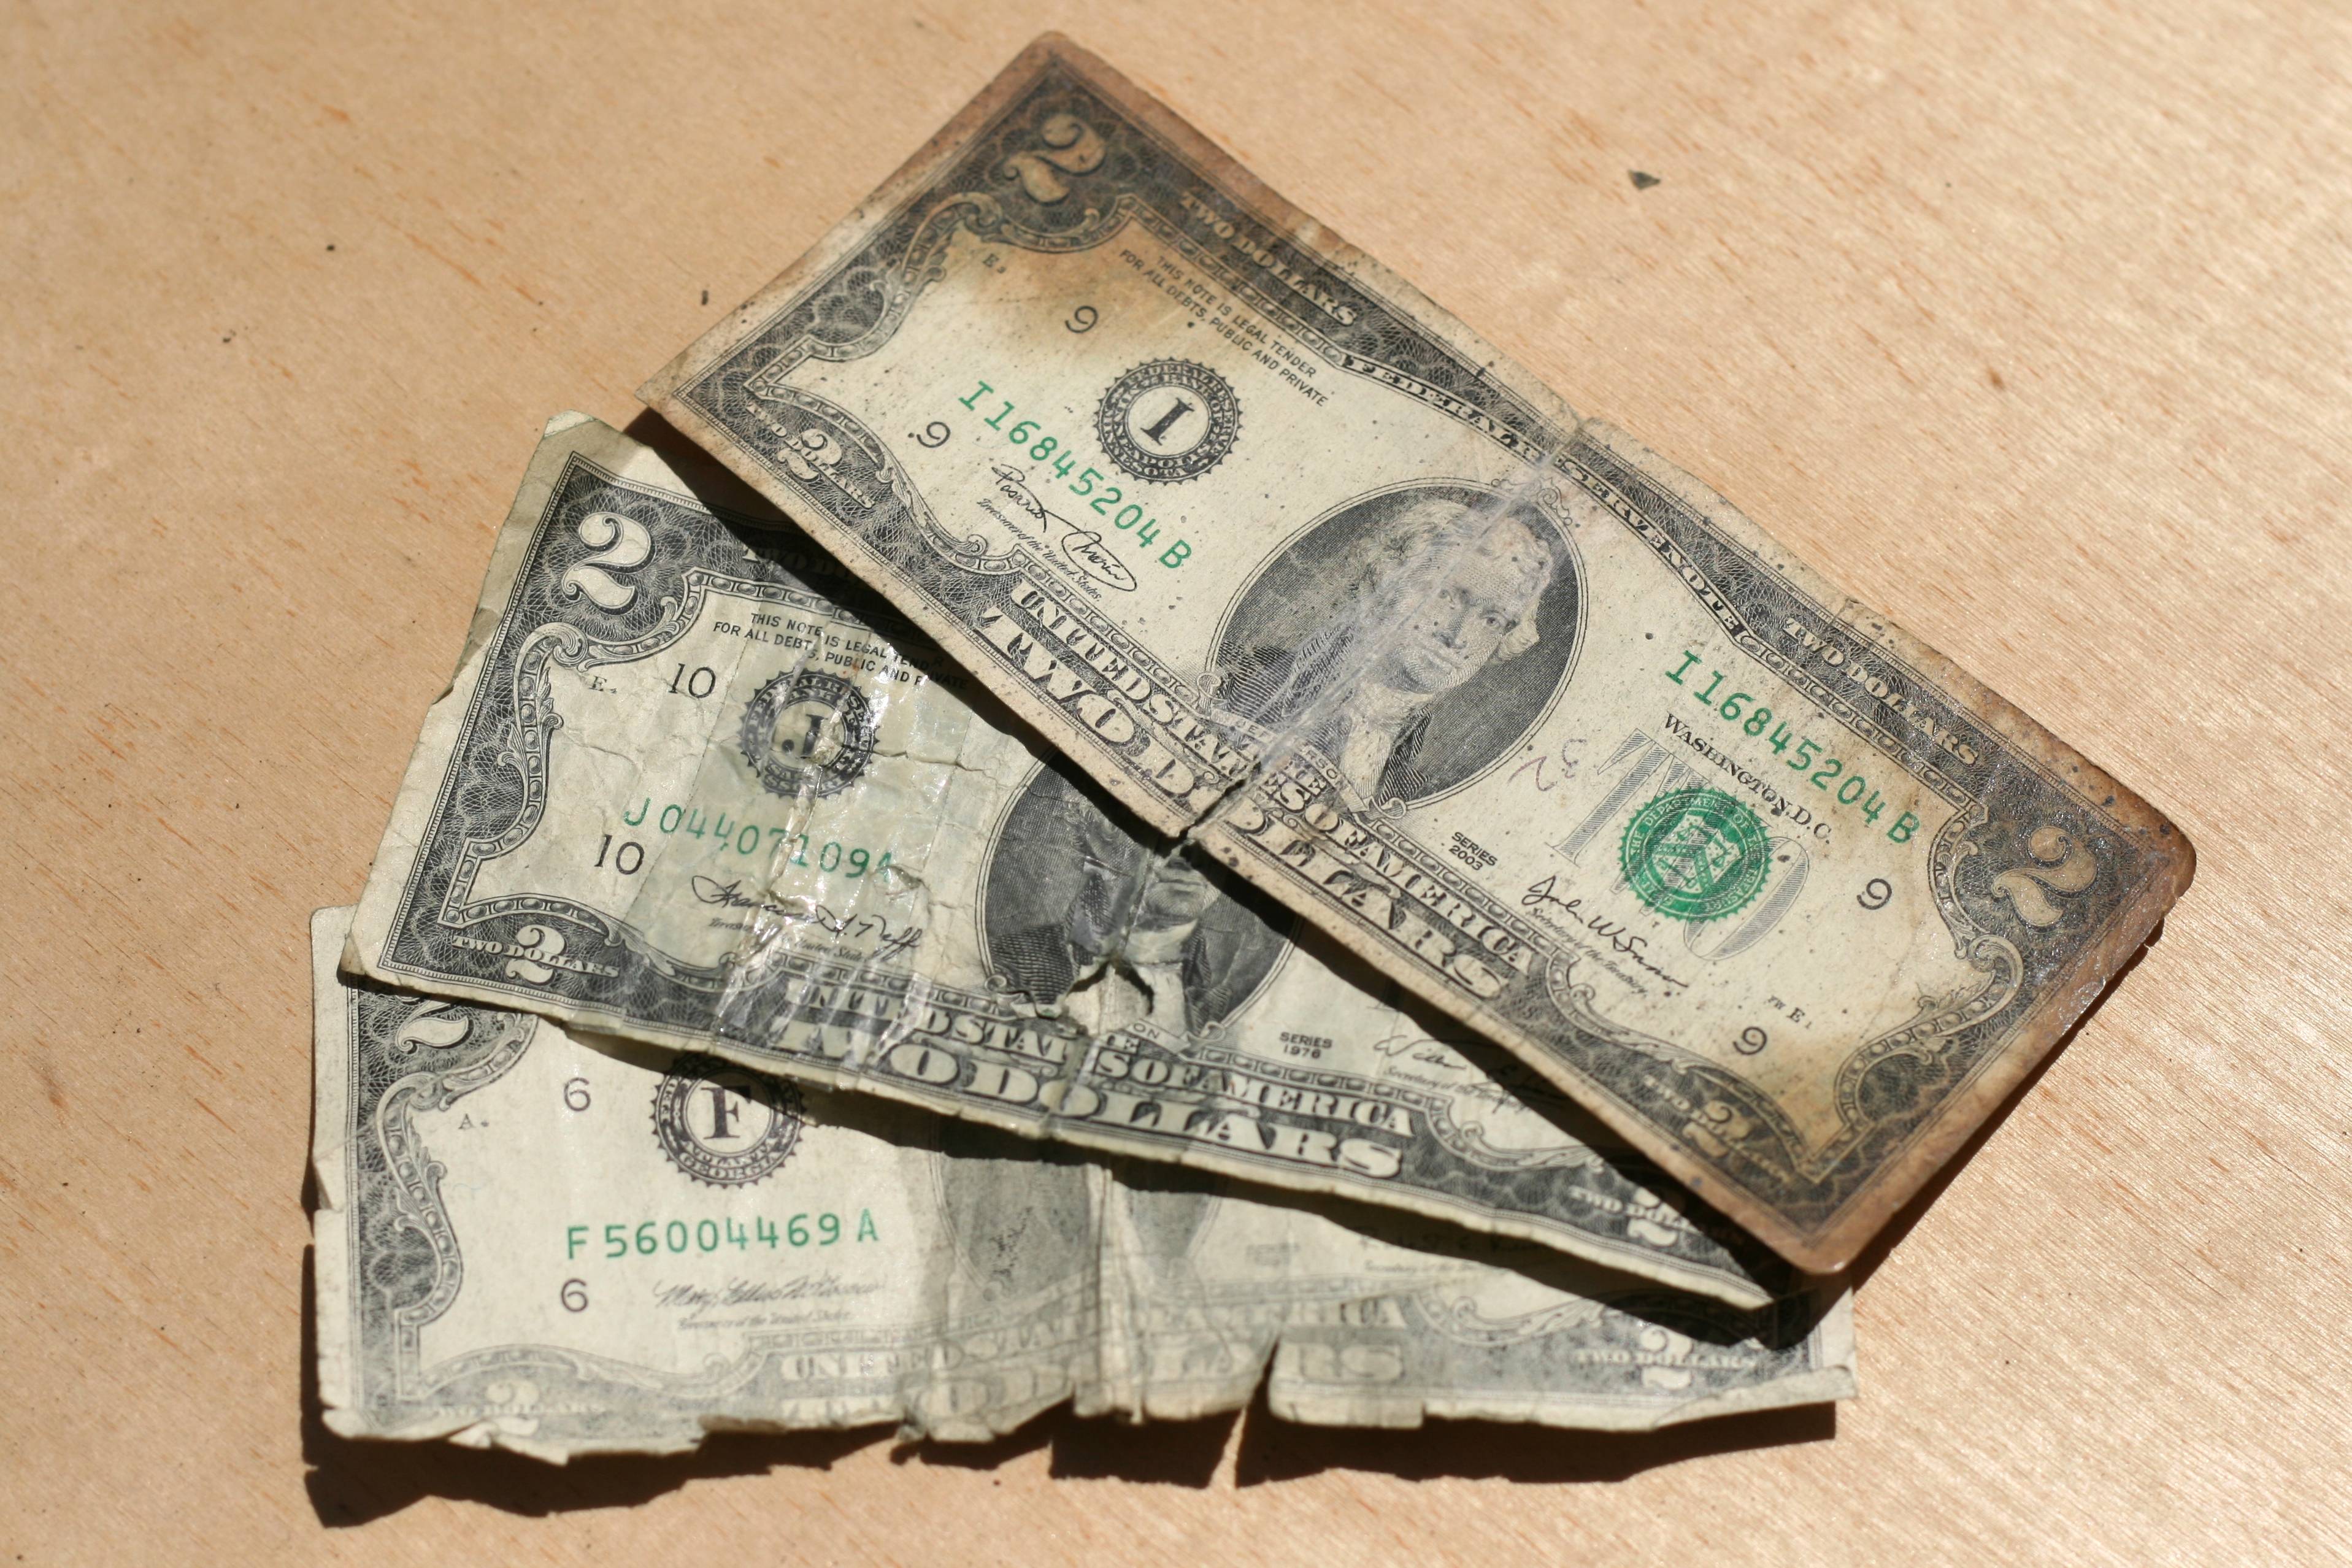 Washing Dollar Bills With Carbon Dioxide Could Save Billions ...